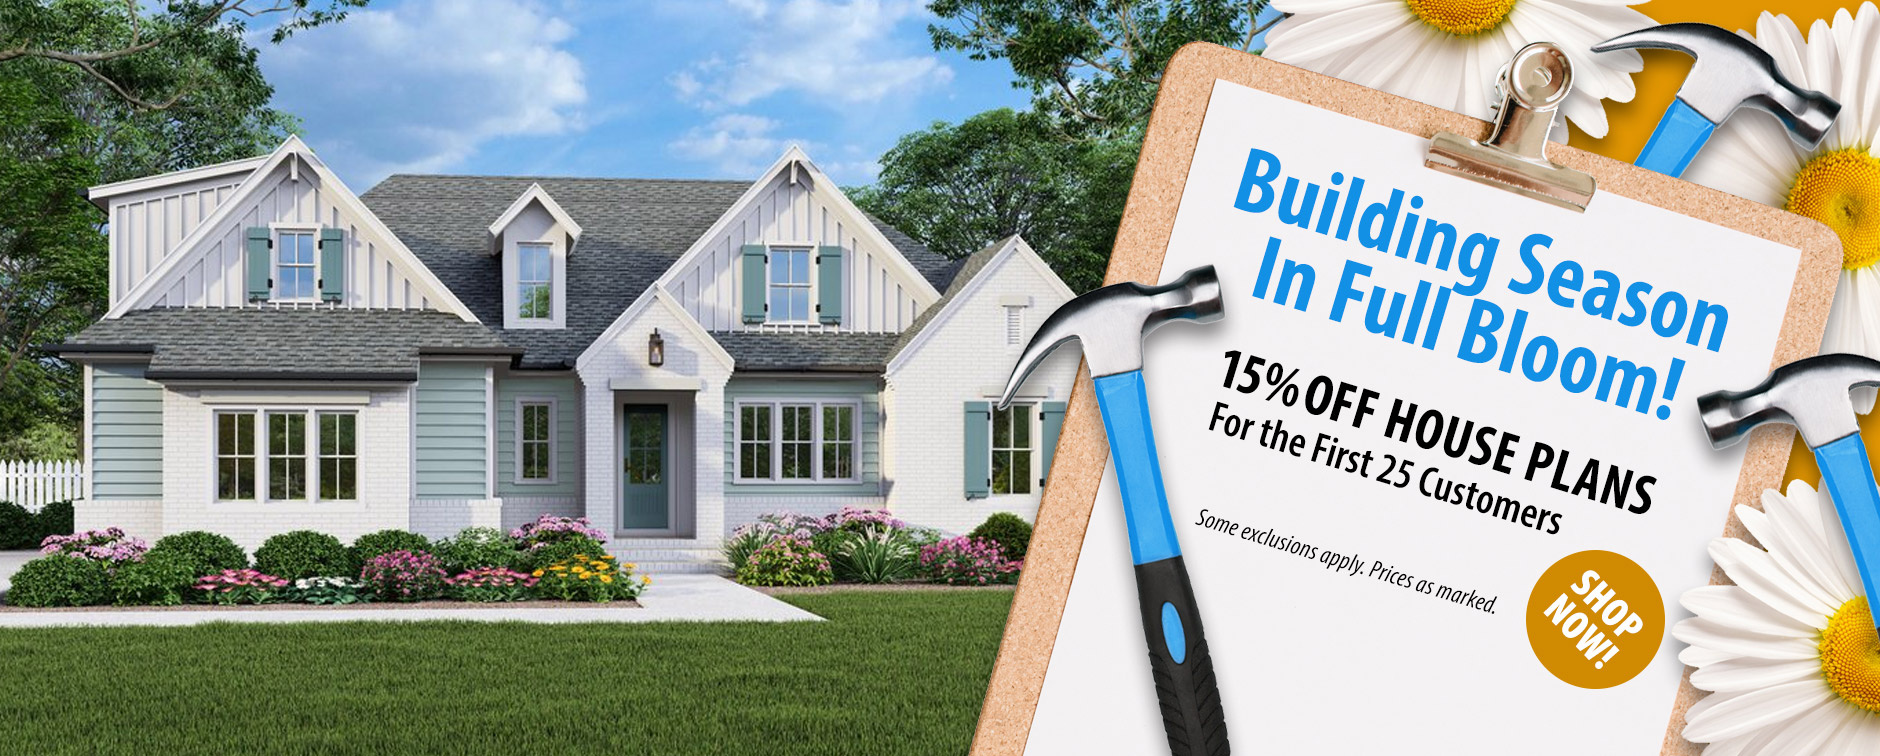 Enjoy 15% Off Thousands of House Plans - First 25 Customers